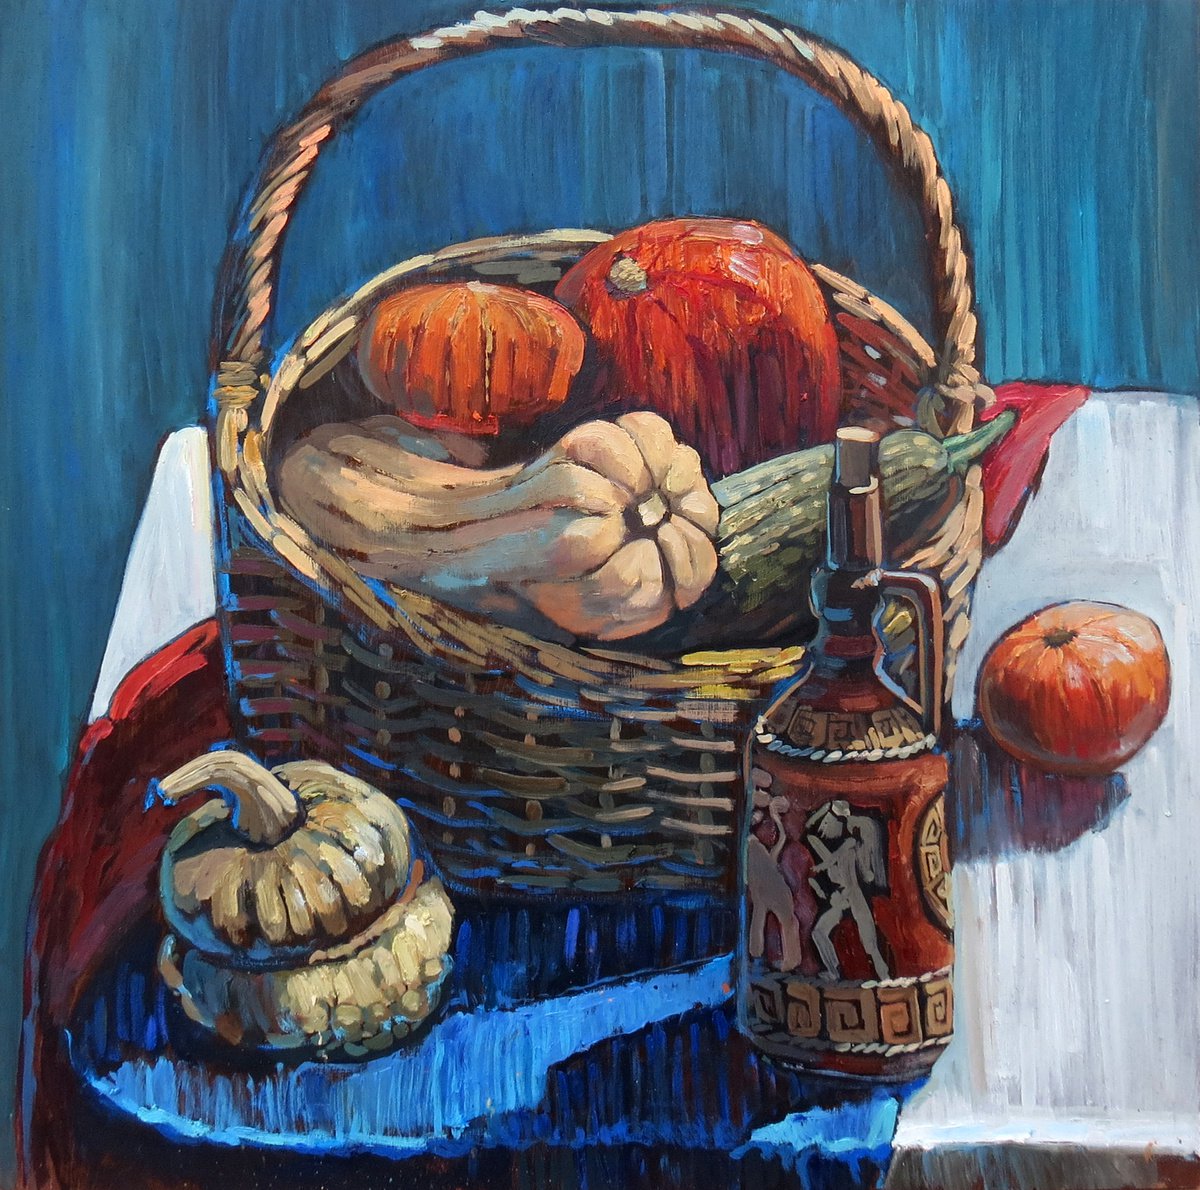 It was a good summer. Still life with a harvest of pumpkins and wine. by Maria Barkovskaya